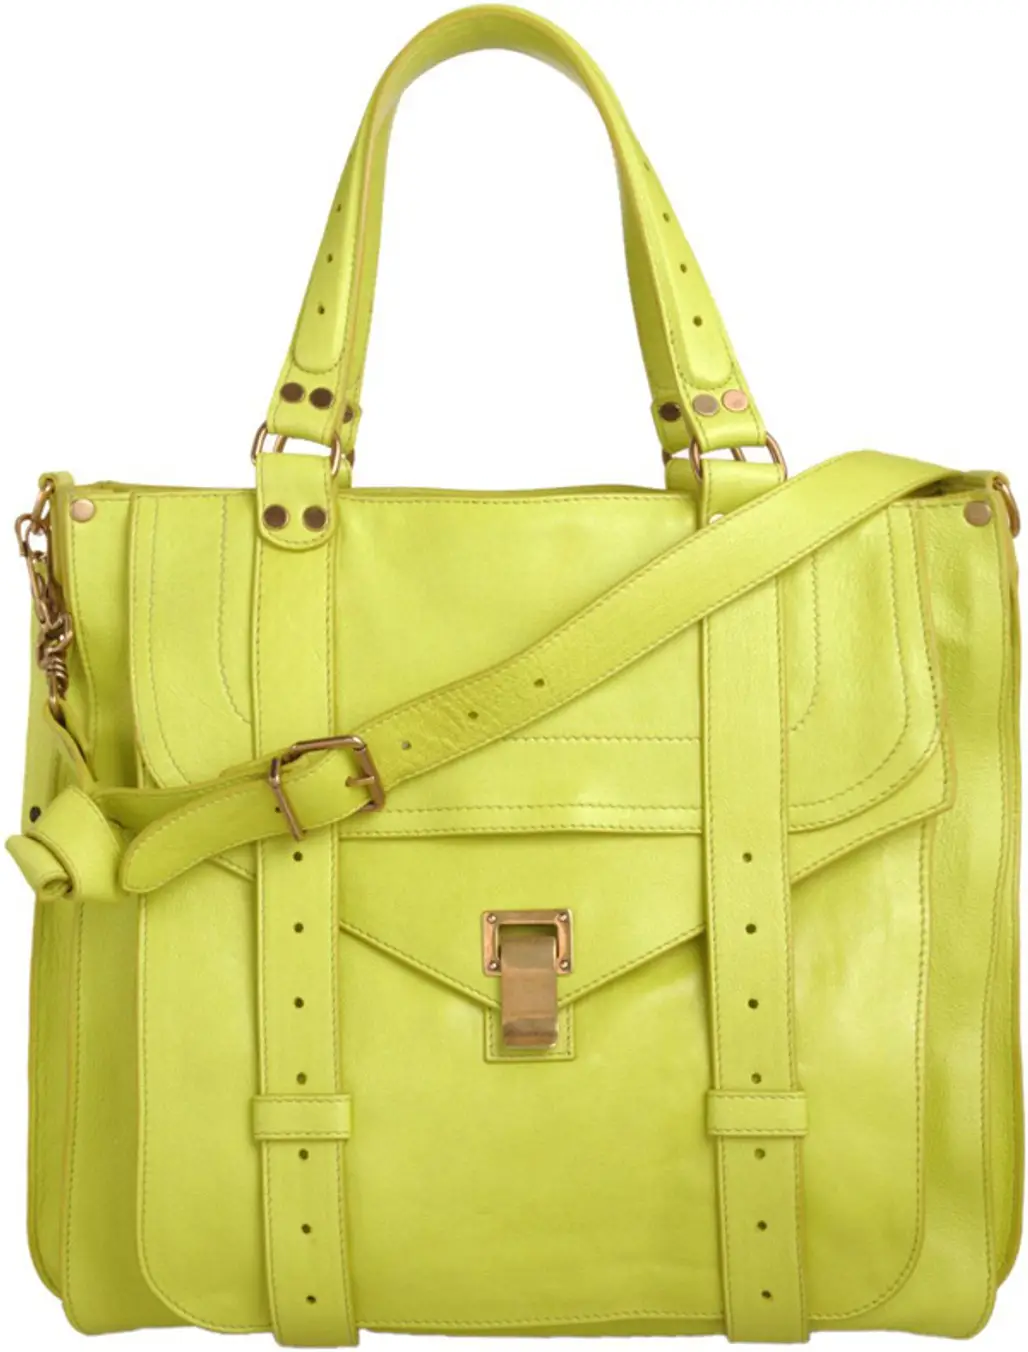 Proenza Schouler PS1 Leather Tote